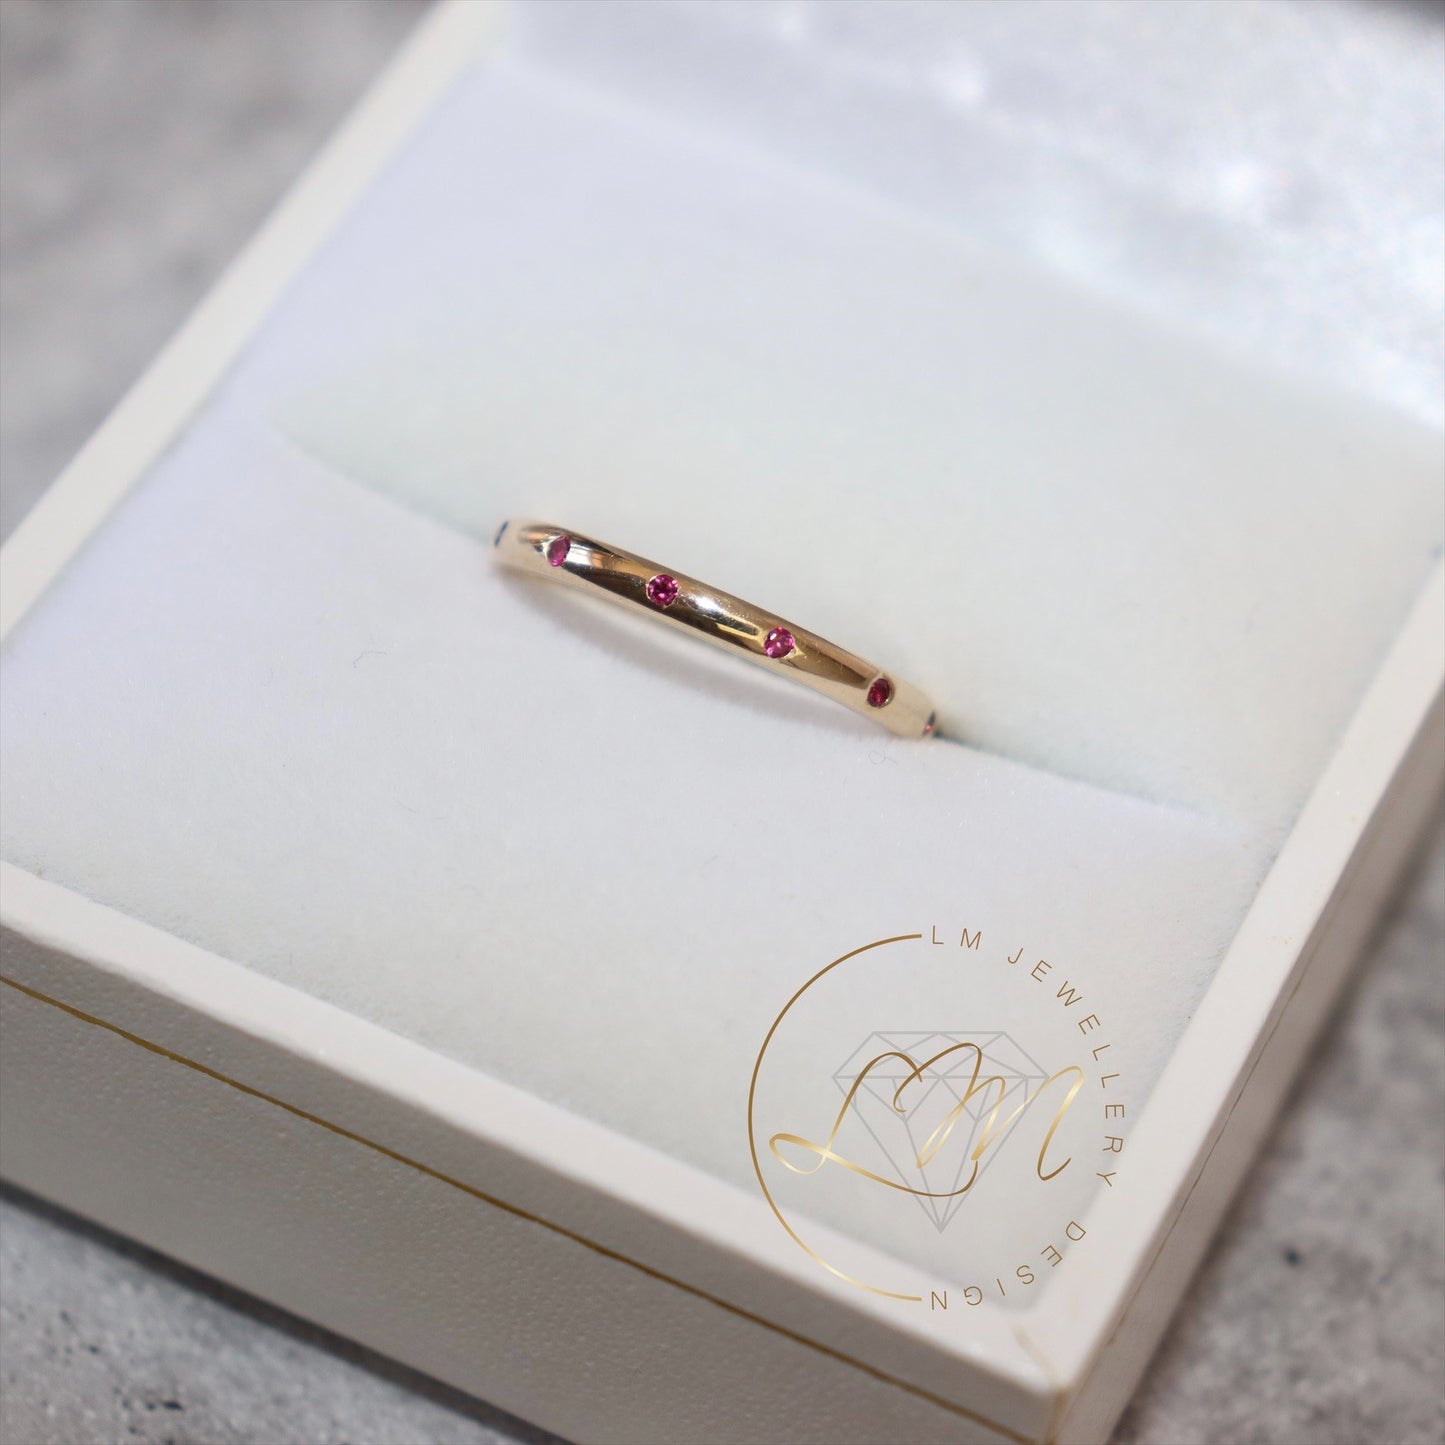 9ct Yellow Gold Petite Ruby Ring